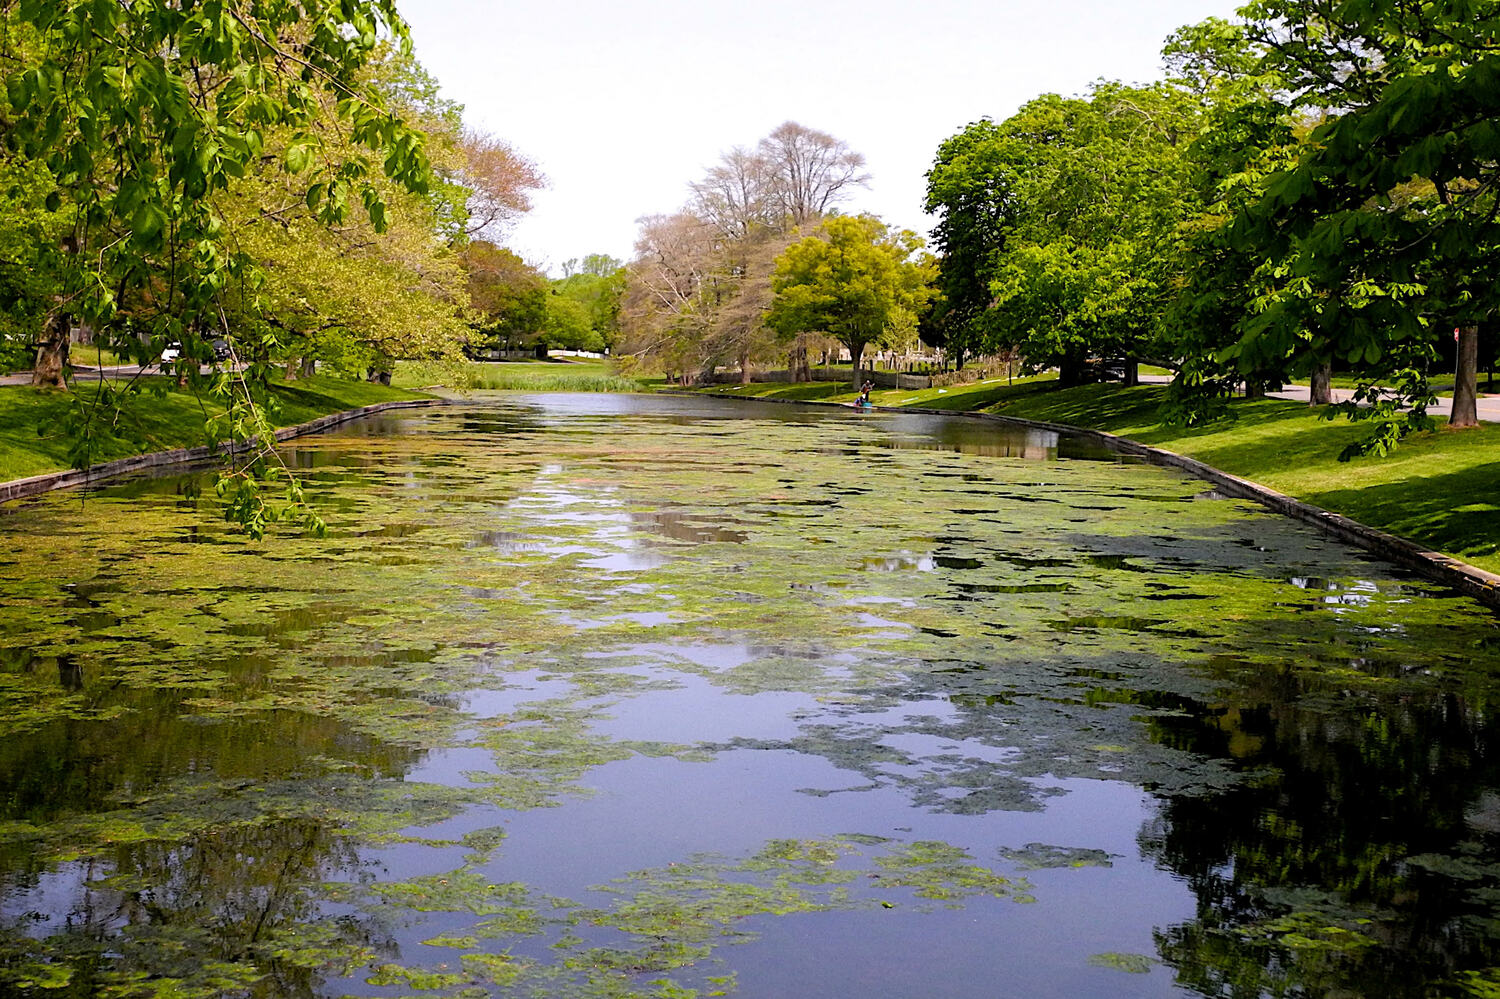 Blobs of slimy algae have been blooming in Town Pond in East Hampton Village this spring. Crews working for the village have been raking it out but new blooms pop up in a matter of days. 
KYRIL BROMLEY